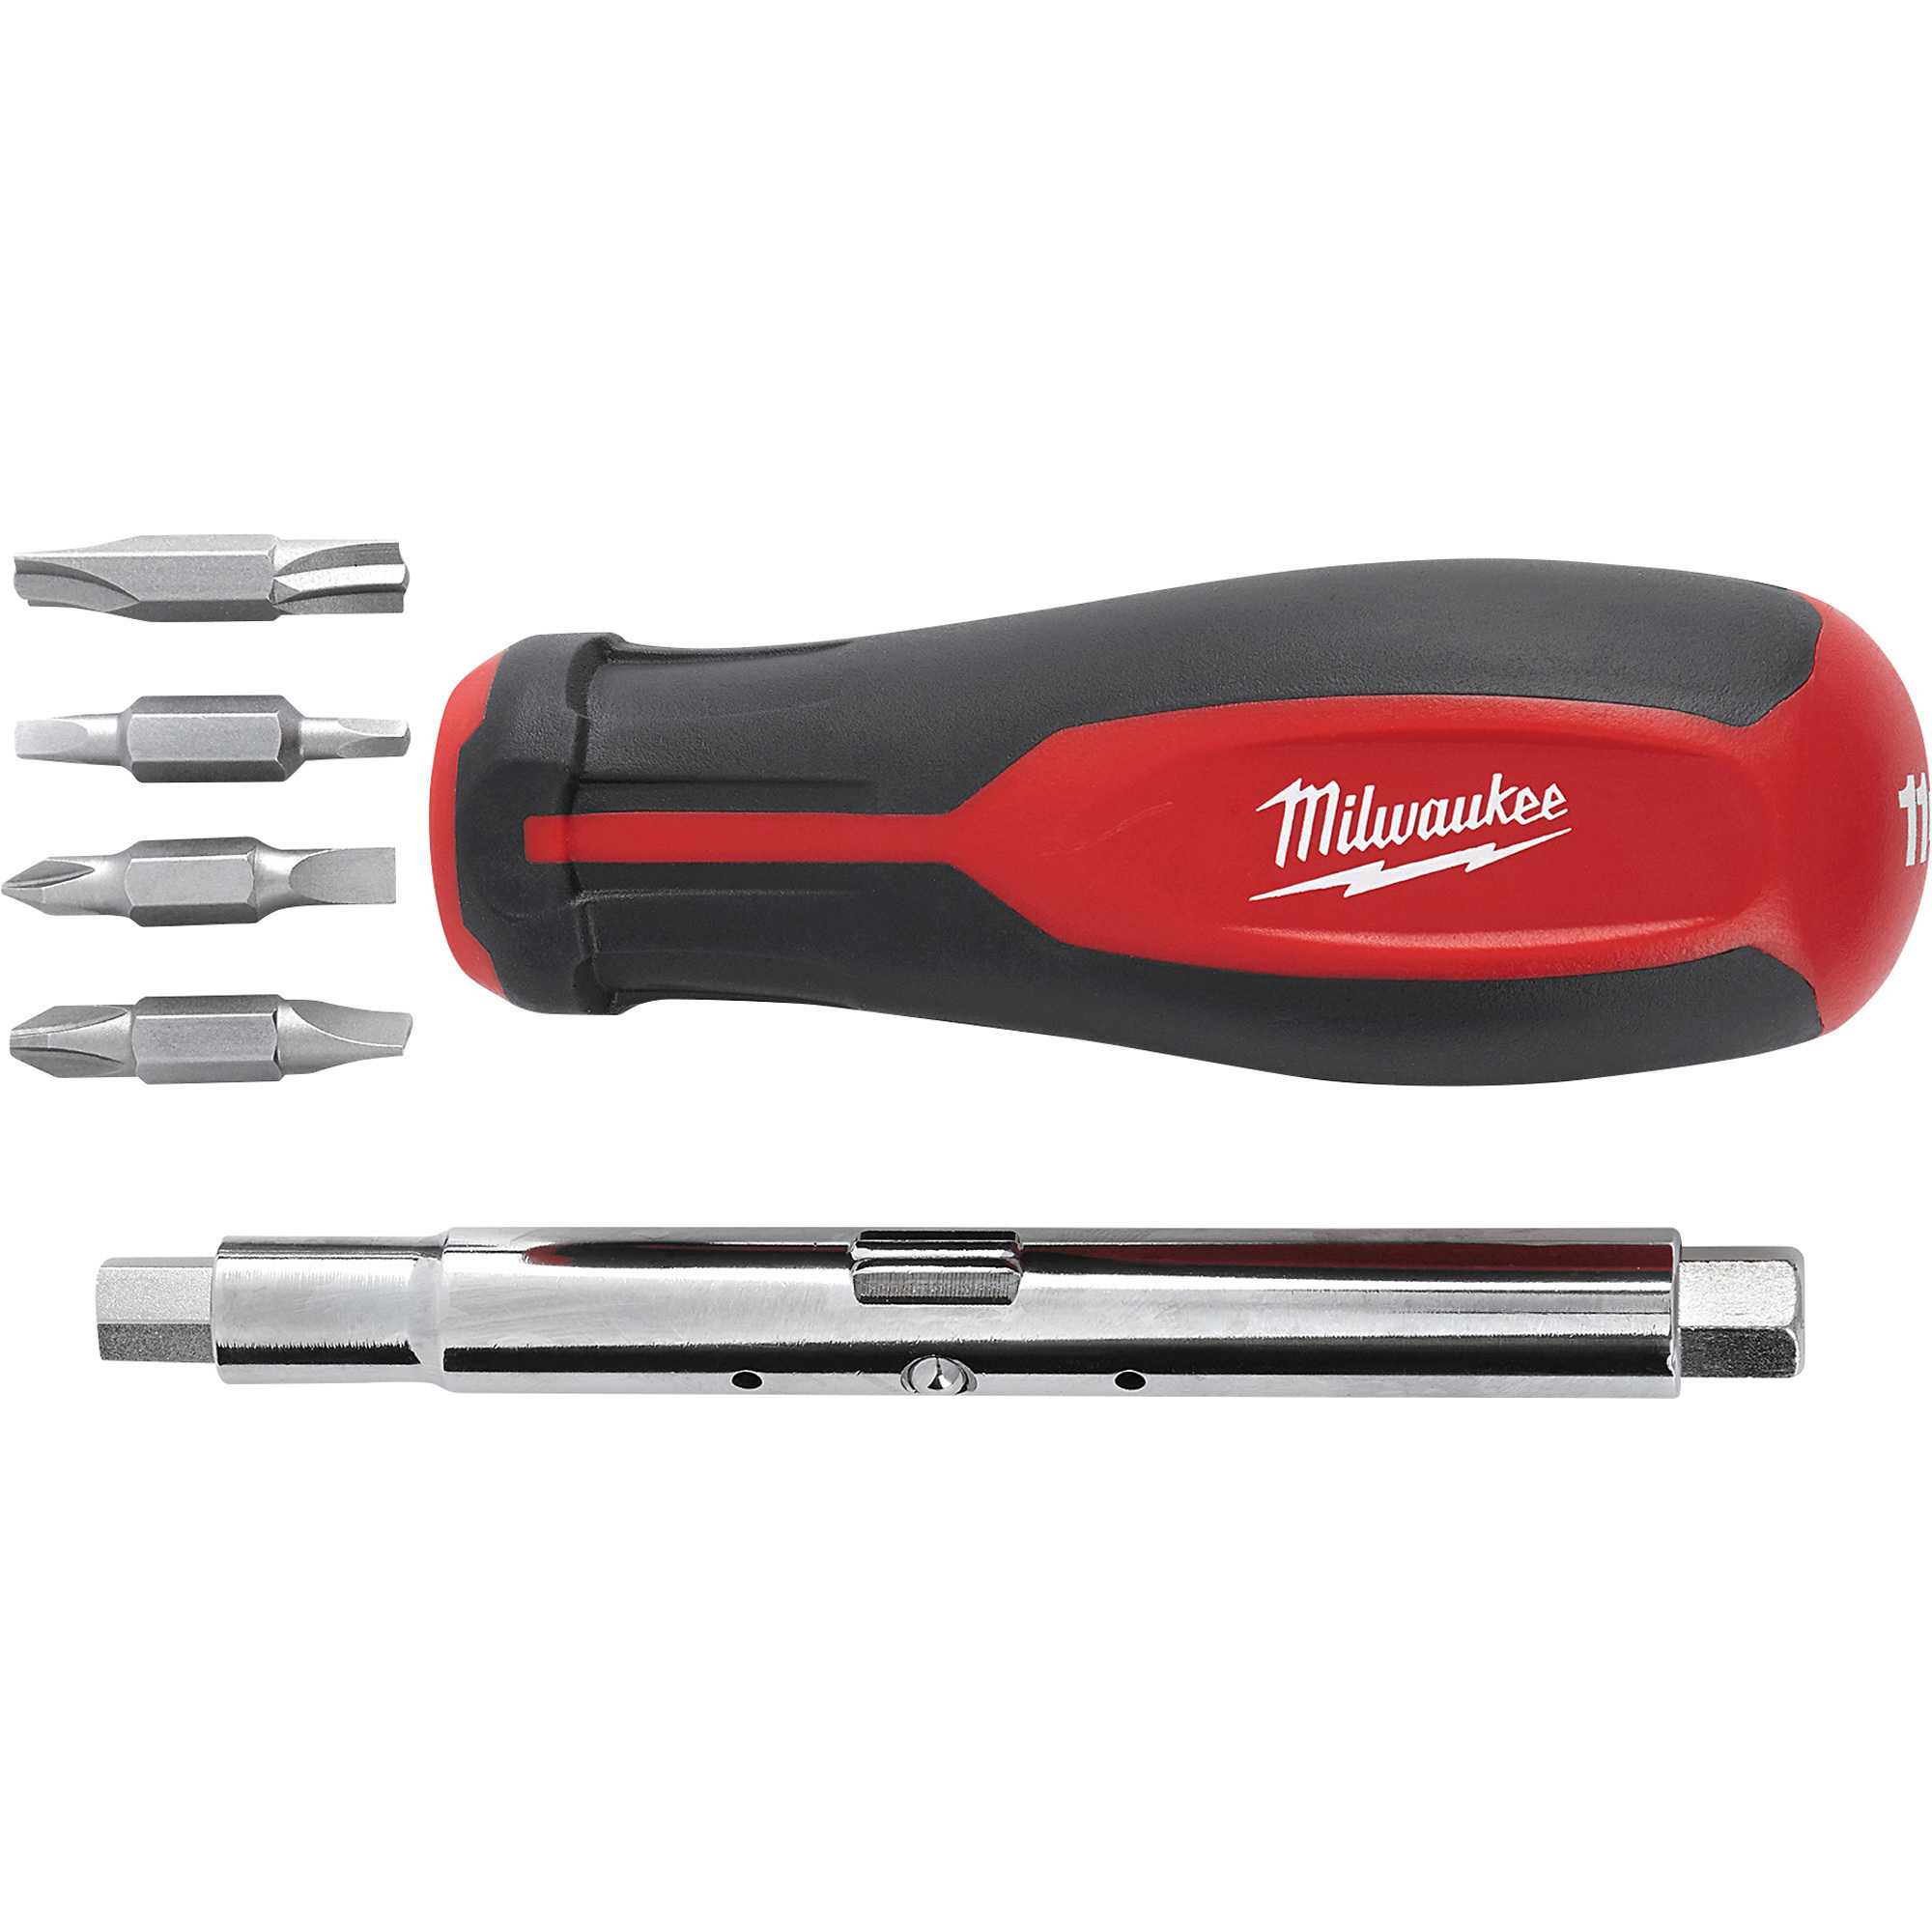 Milwaukee 11-in-1 Screwdriver with ECX, Model 48-22-2760